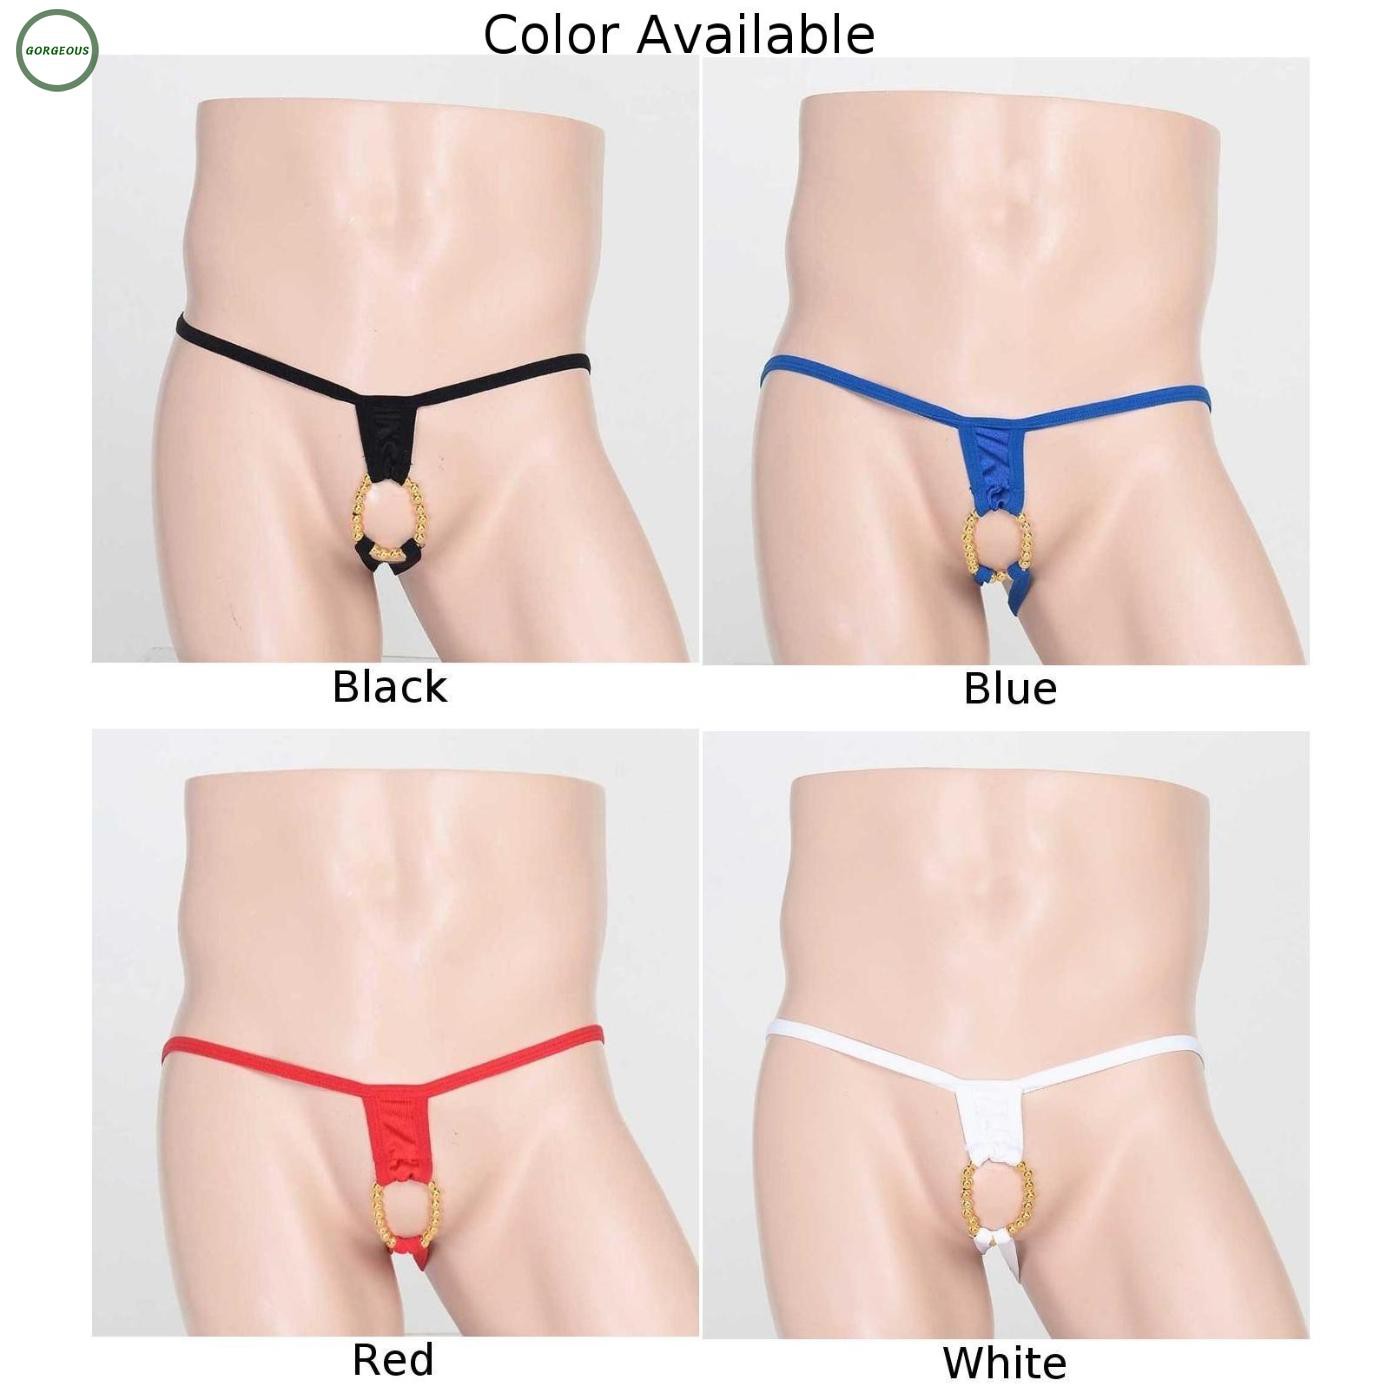 Men Sexy Low Rise Briefs Thong G-String T-Back High Stretch Lingerie Underwear